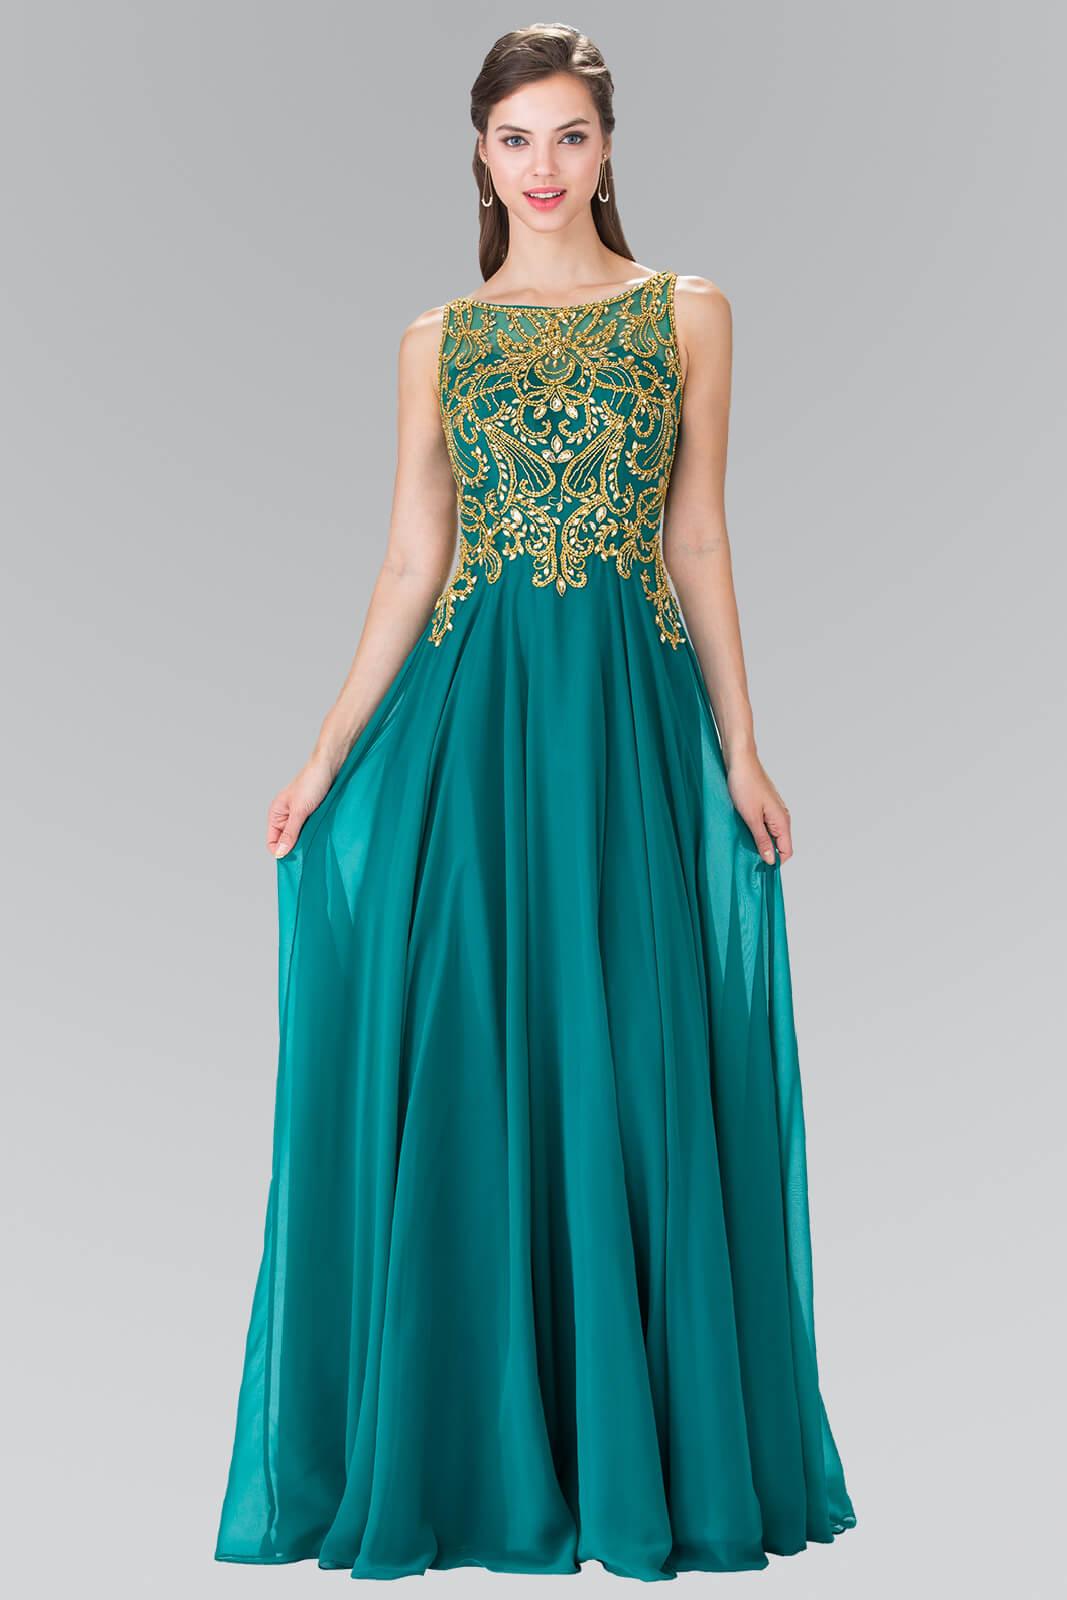 Sleeveless Long Prom Dress Evening Gown - The Dress Outlet Elizabeth K